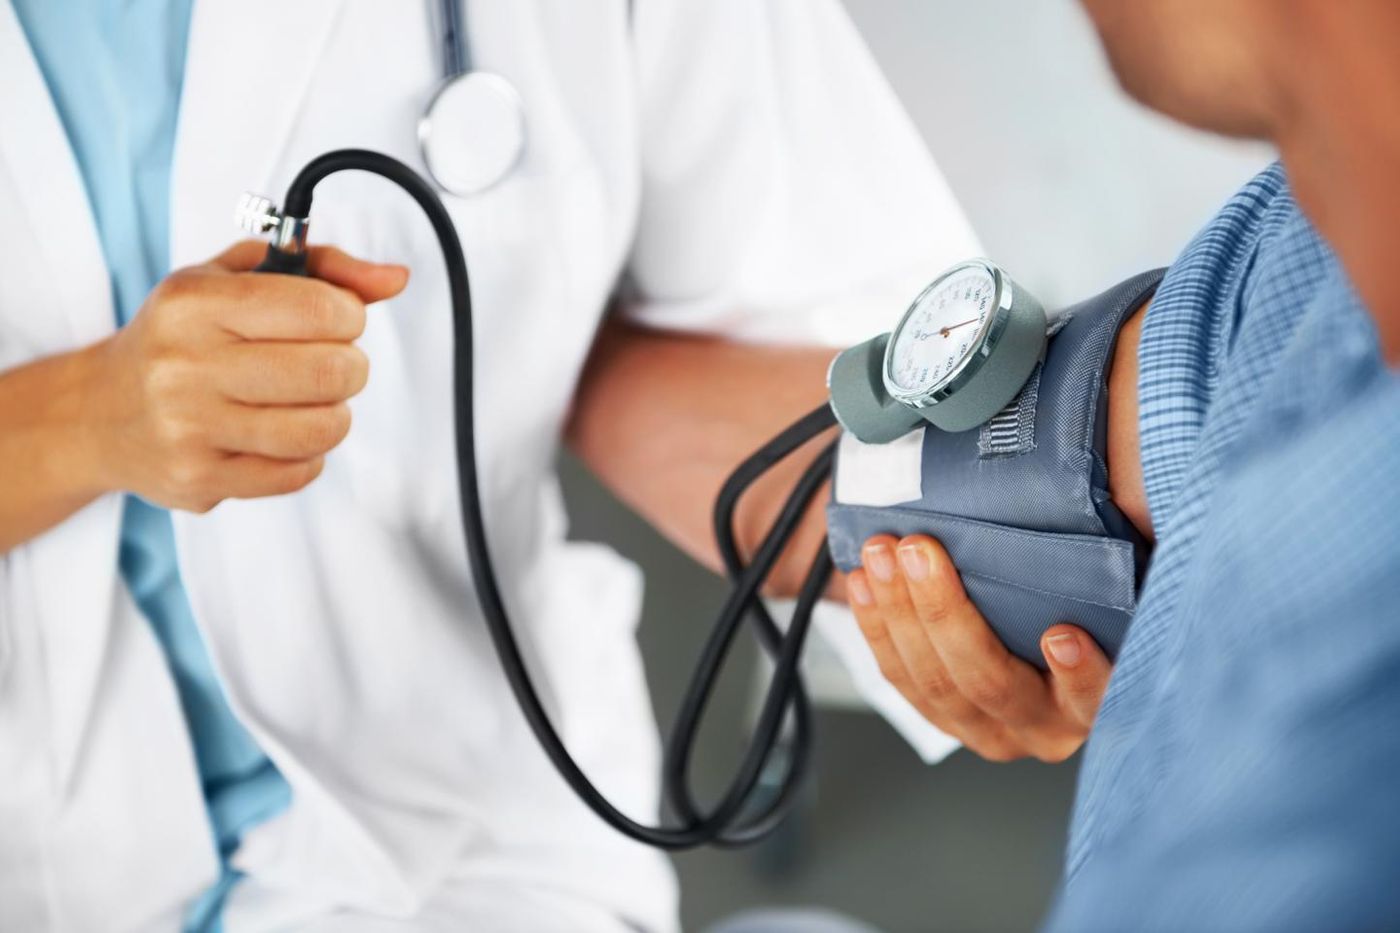 Extreme ups and downs in systolic blood pressure may be just as deadly as having consistently high blood pressure. Credit: Intermountain Medical Center Heart Institute